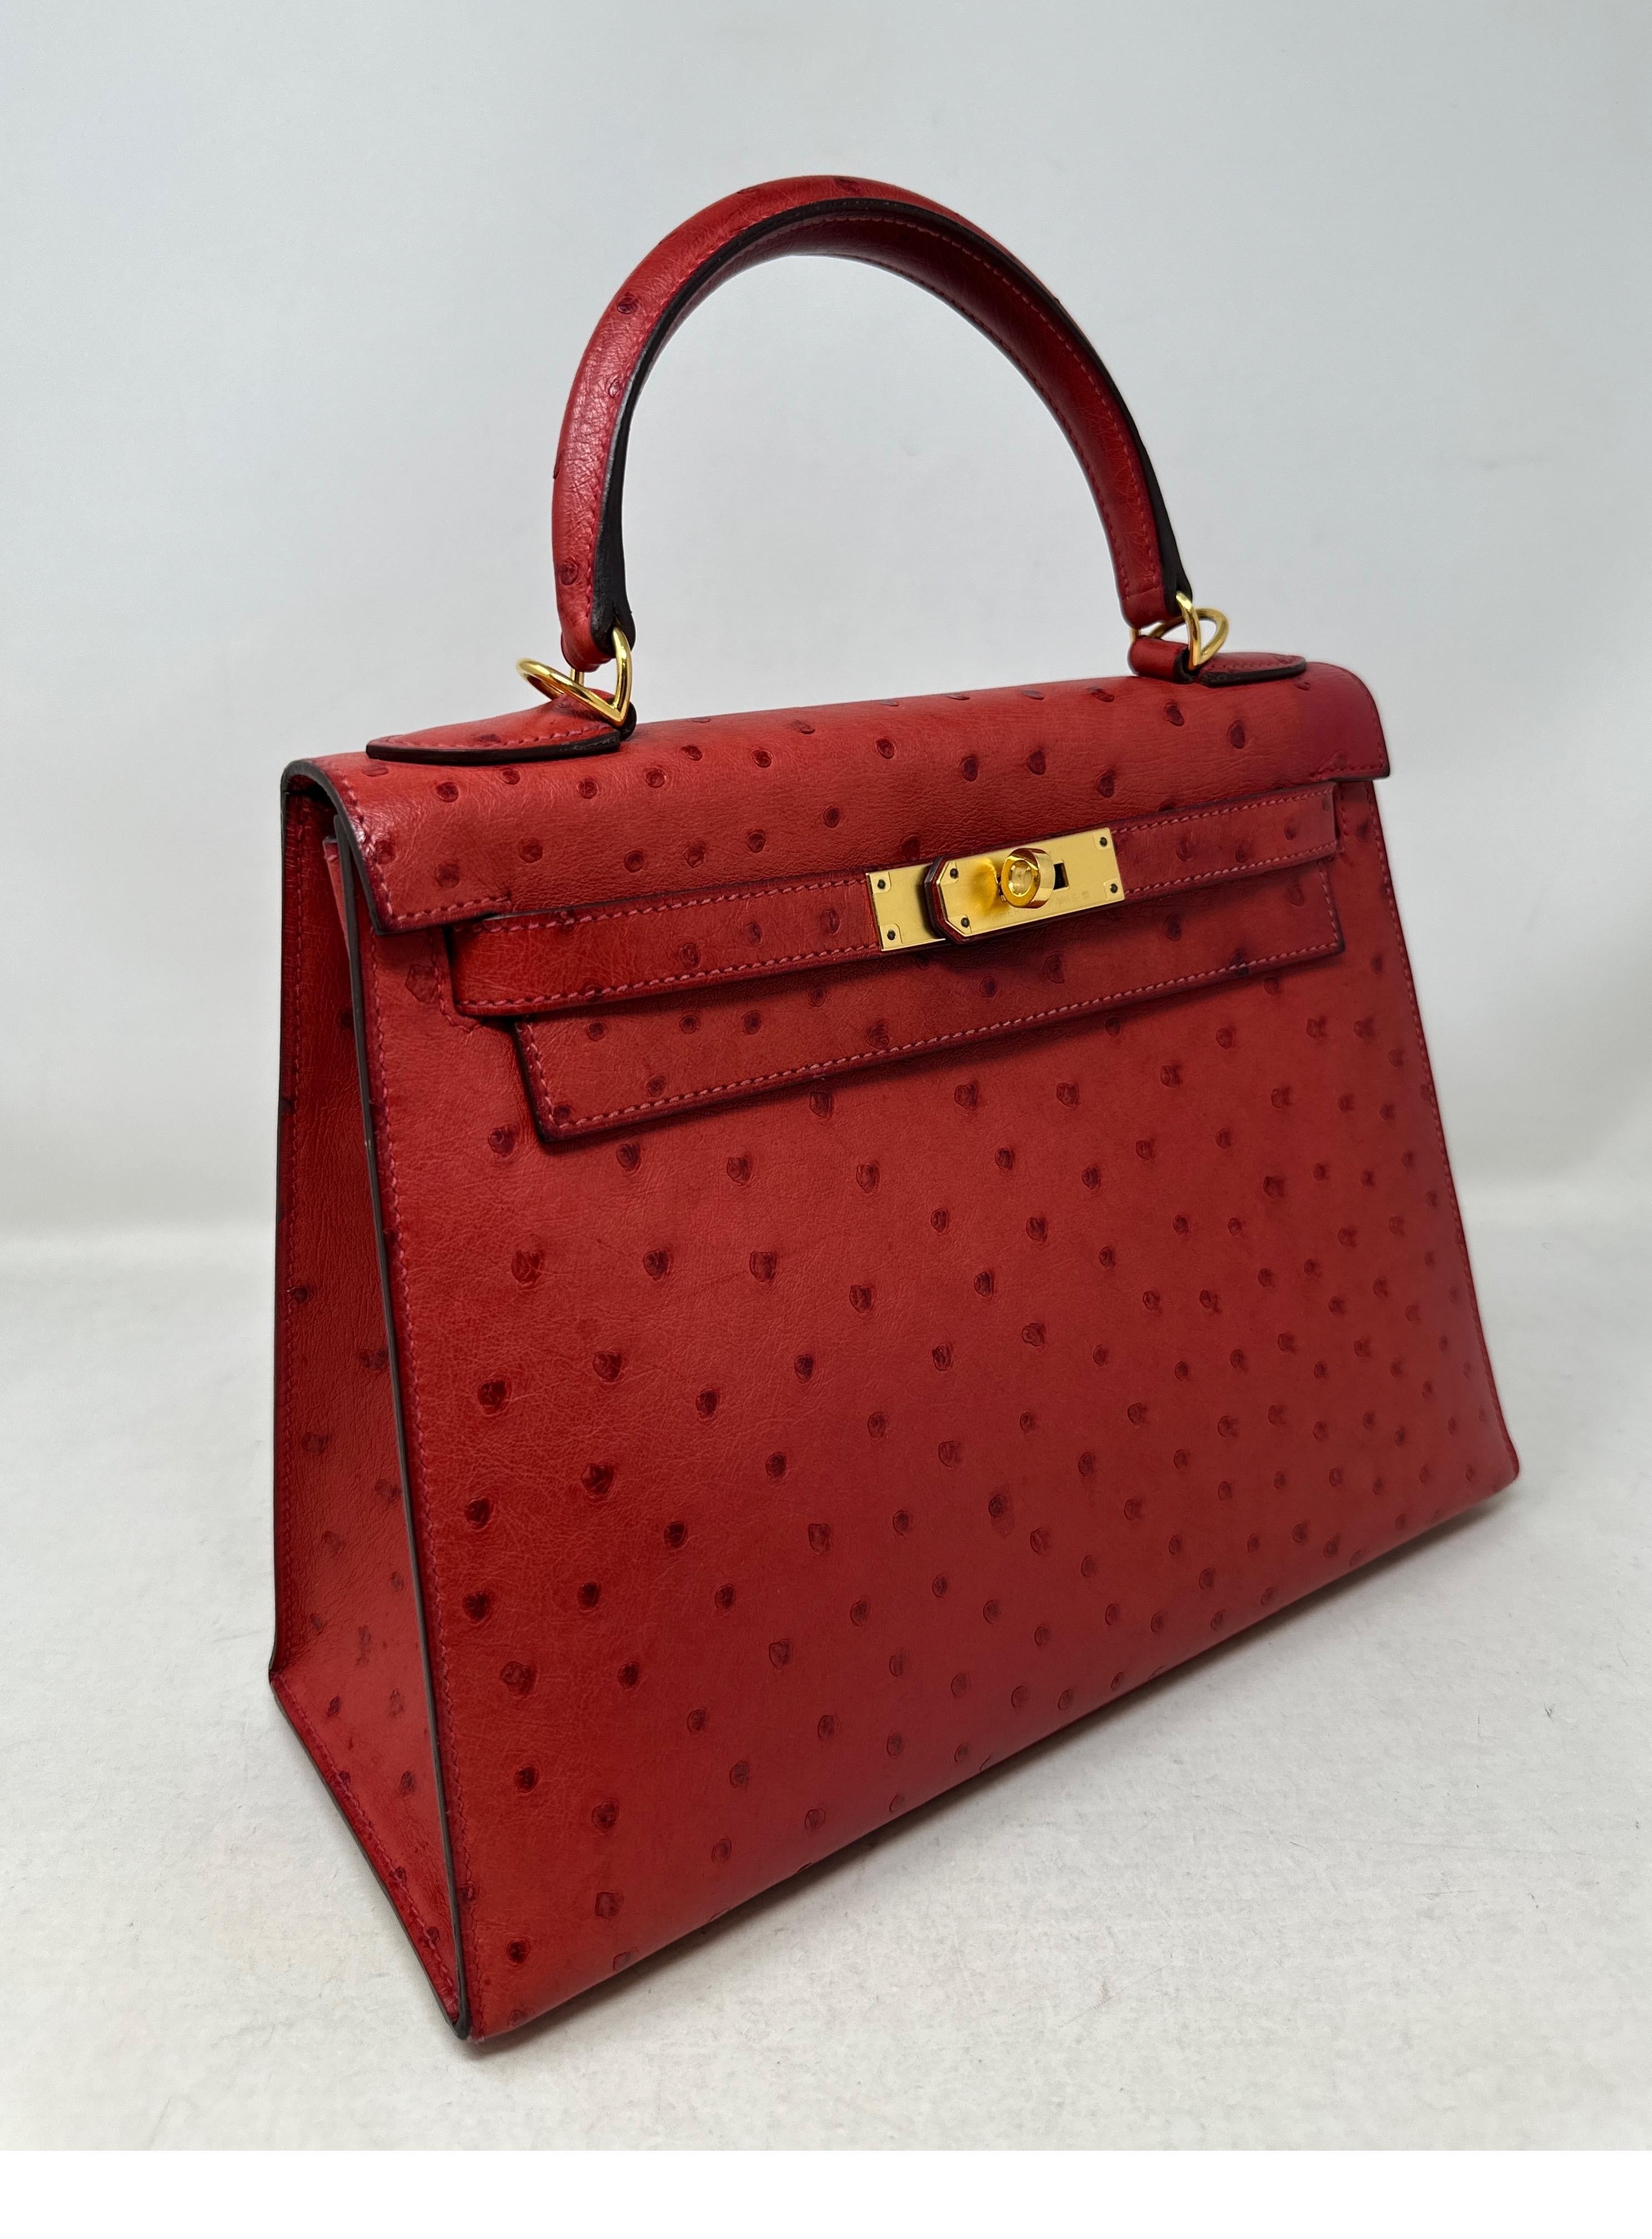 Hermes Ostrich Kelly 28 Bag  In Good Condition For Sale In Athens, GA